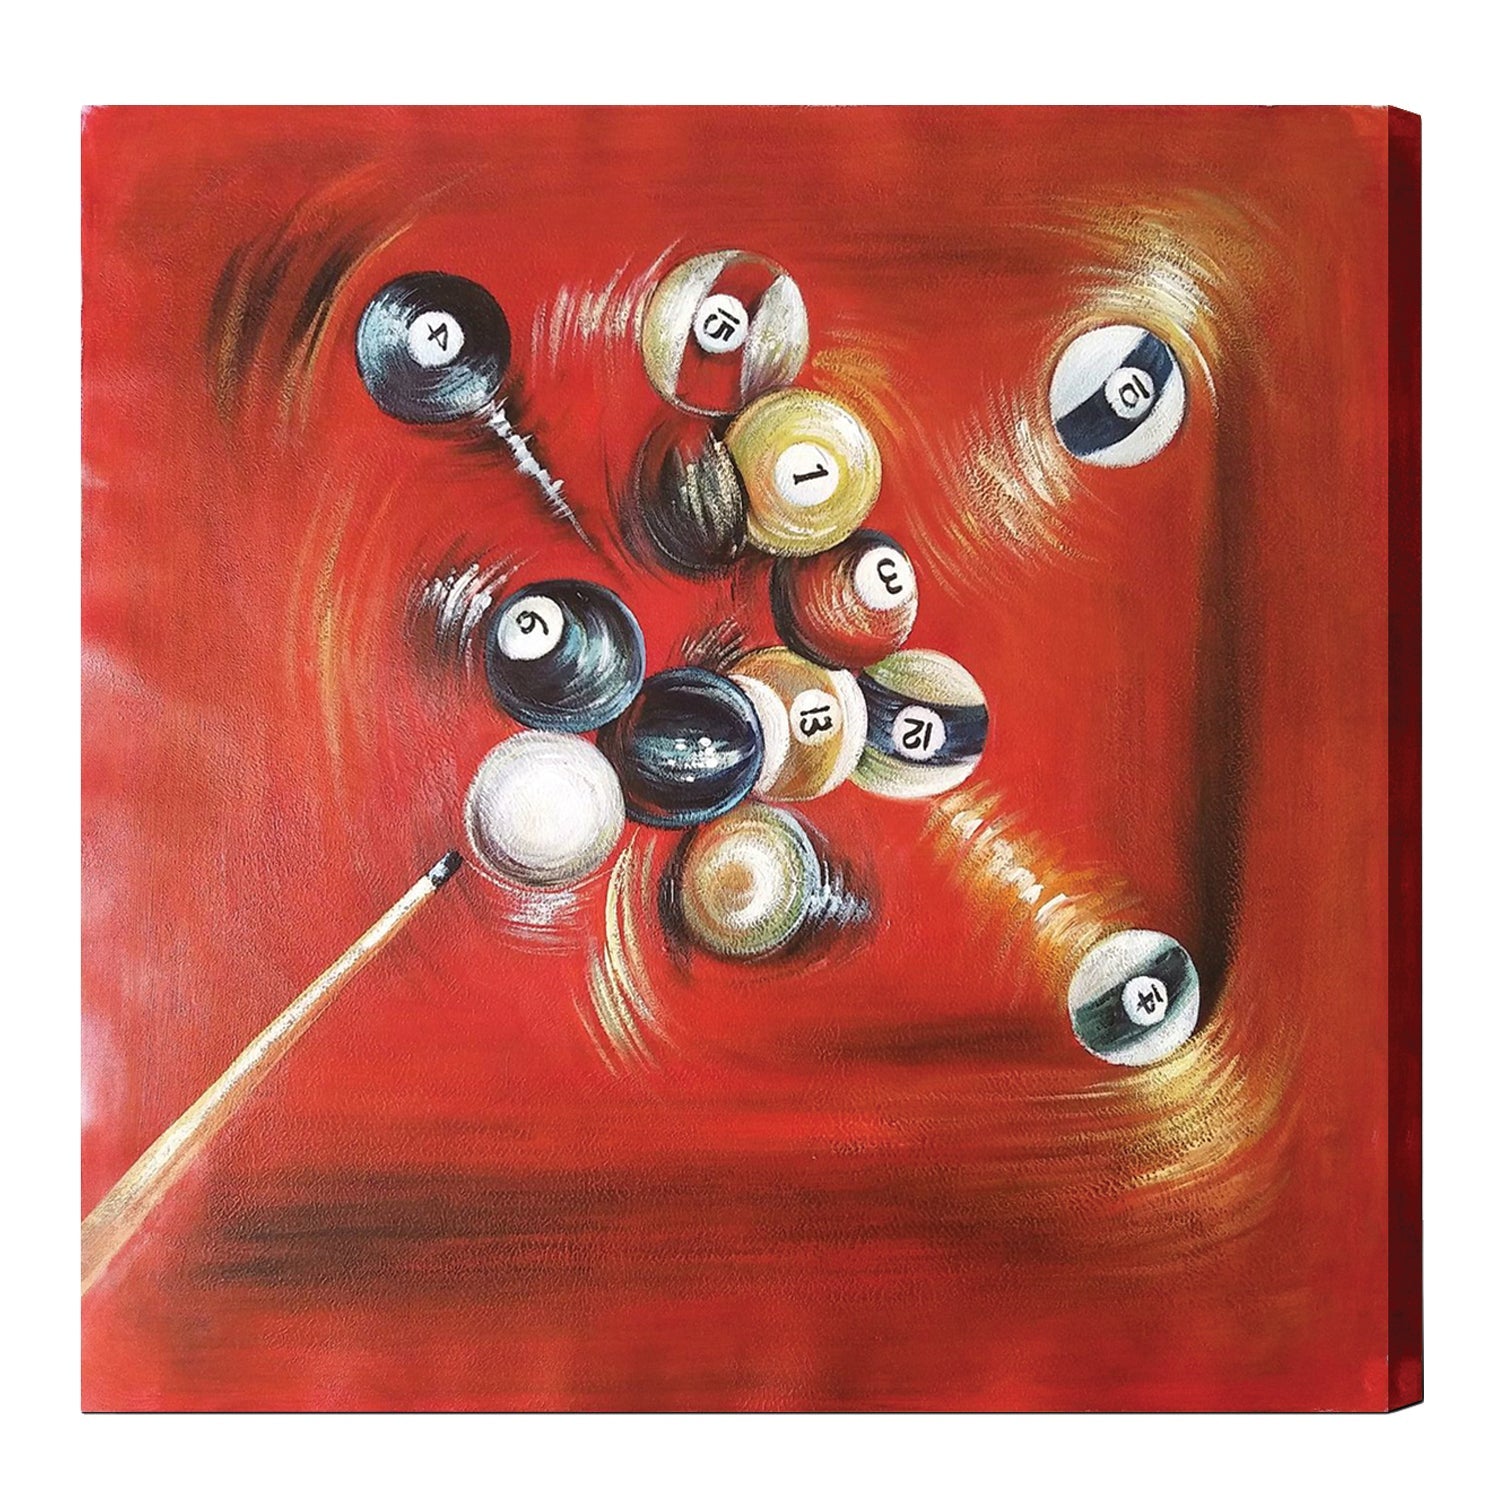 OIL PAINTING ON CANVAS - BALLS IN MOTION WITH CUE-Game Table Genie